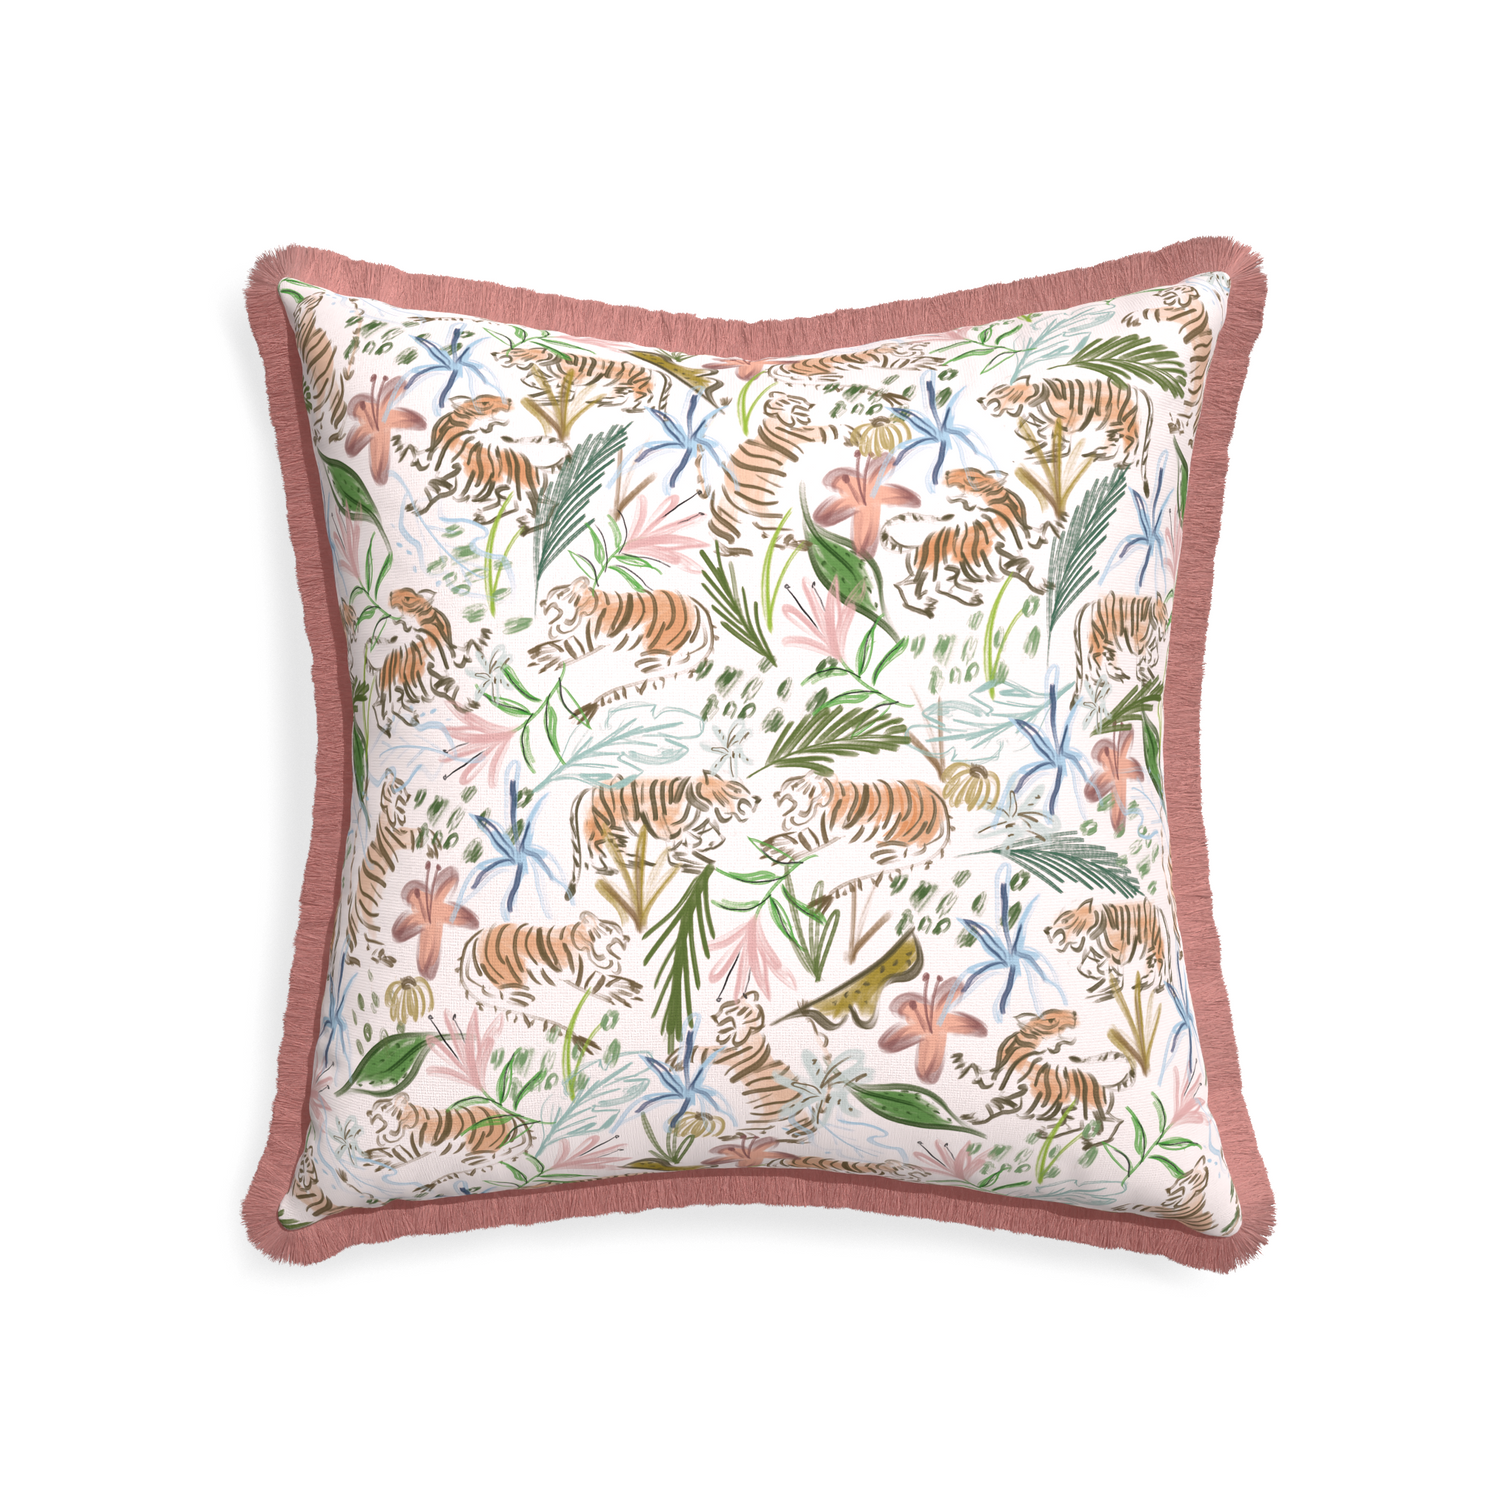 22-square frida pink custom pink chinoiserie tigerpillow with d fringe on white background